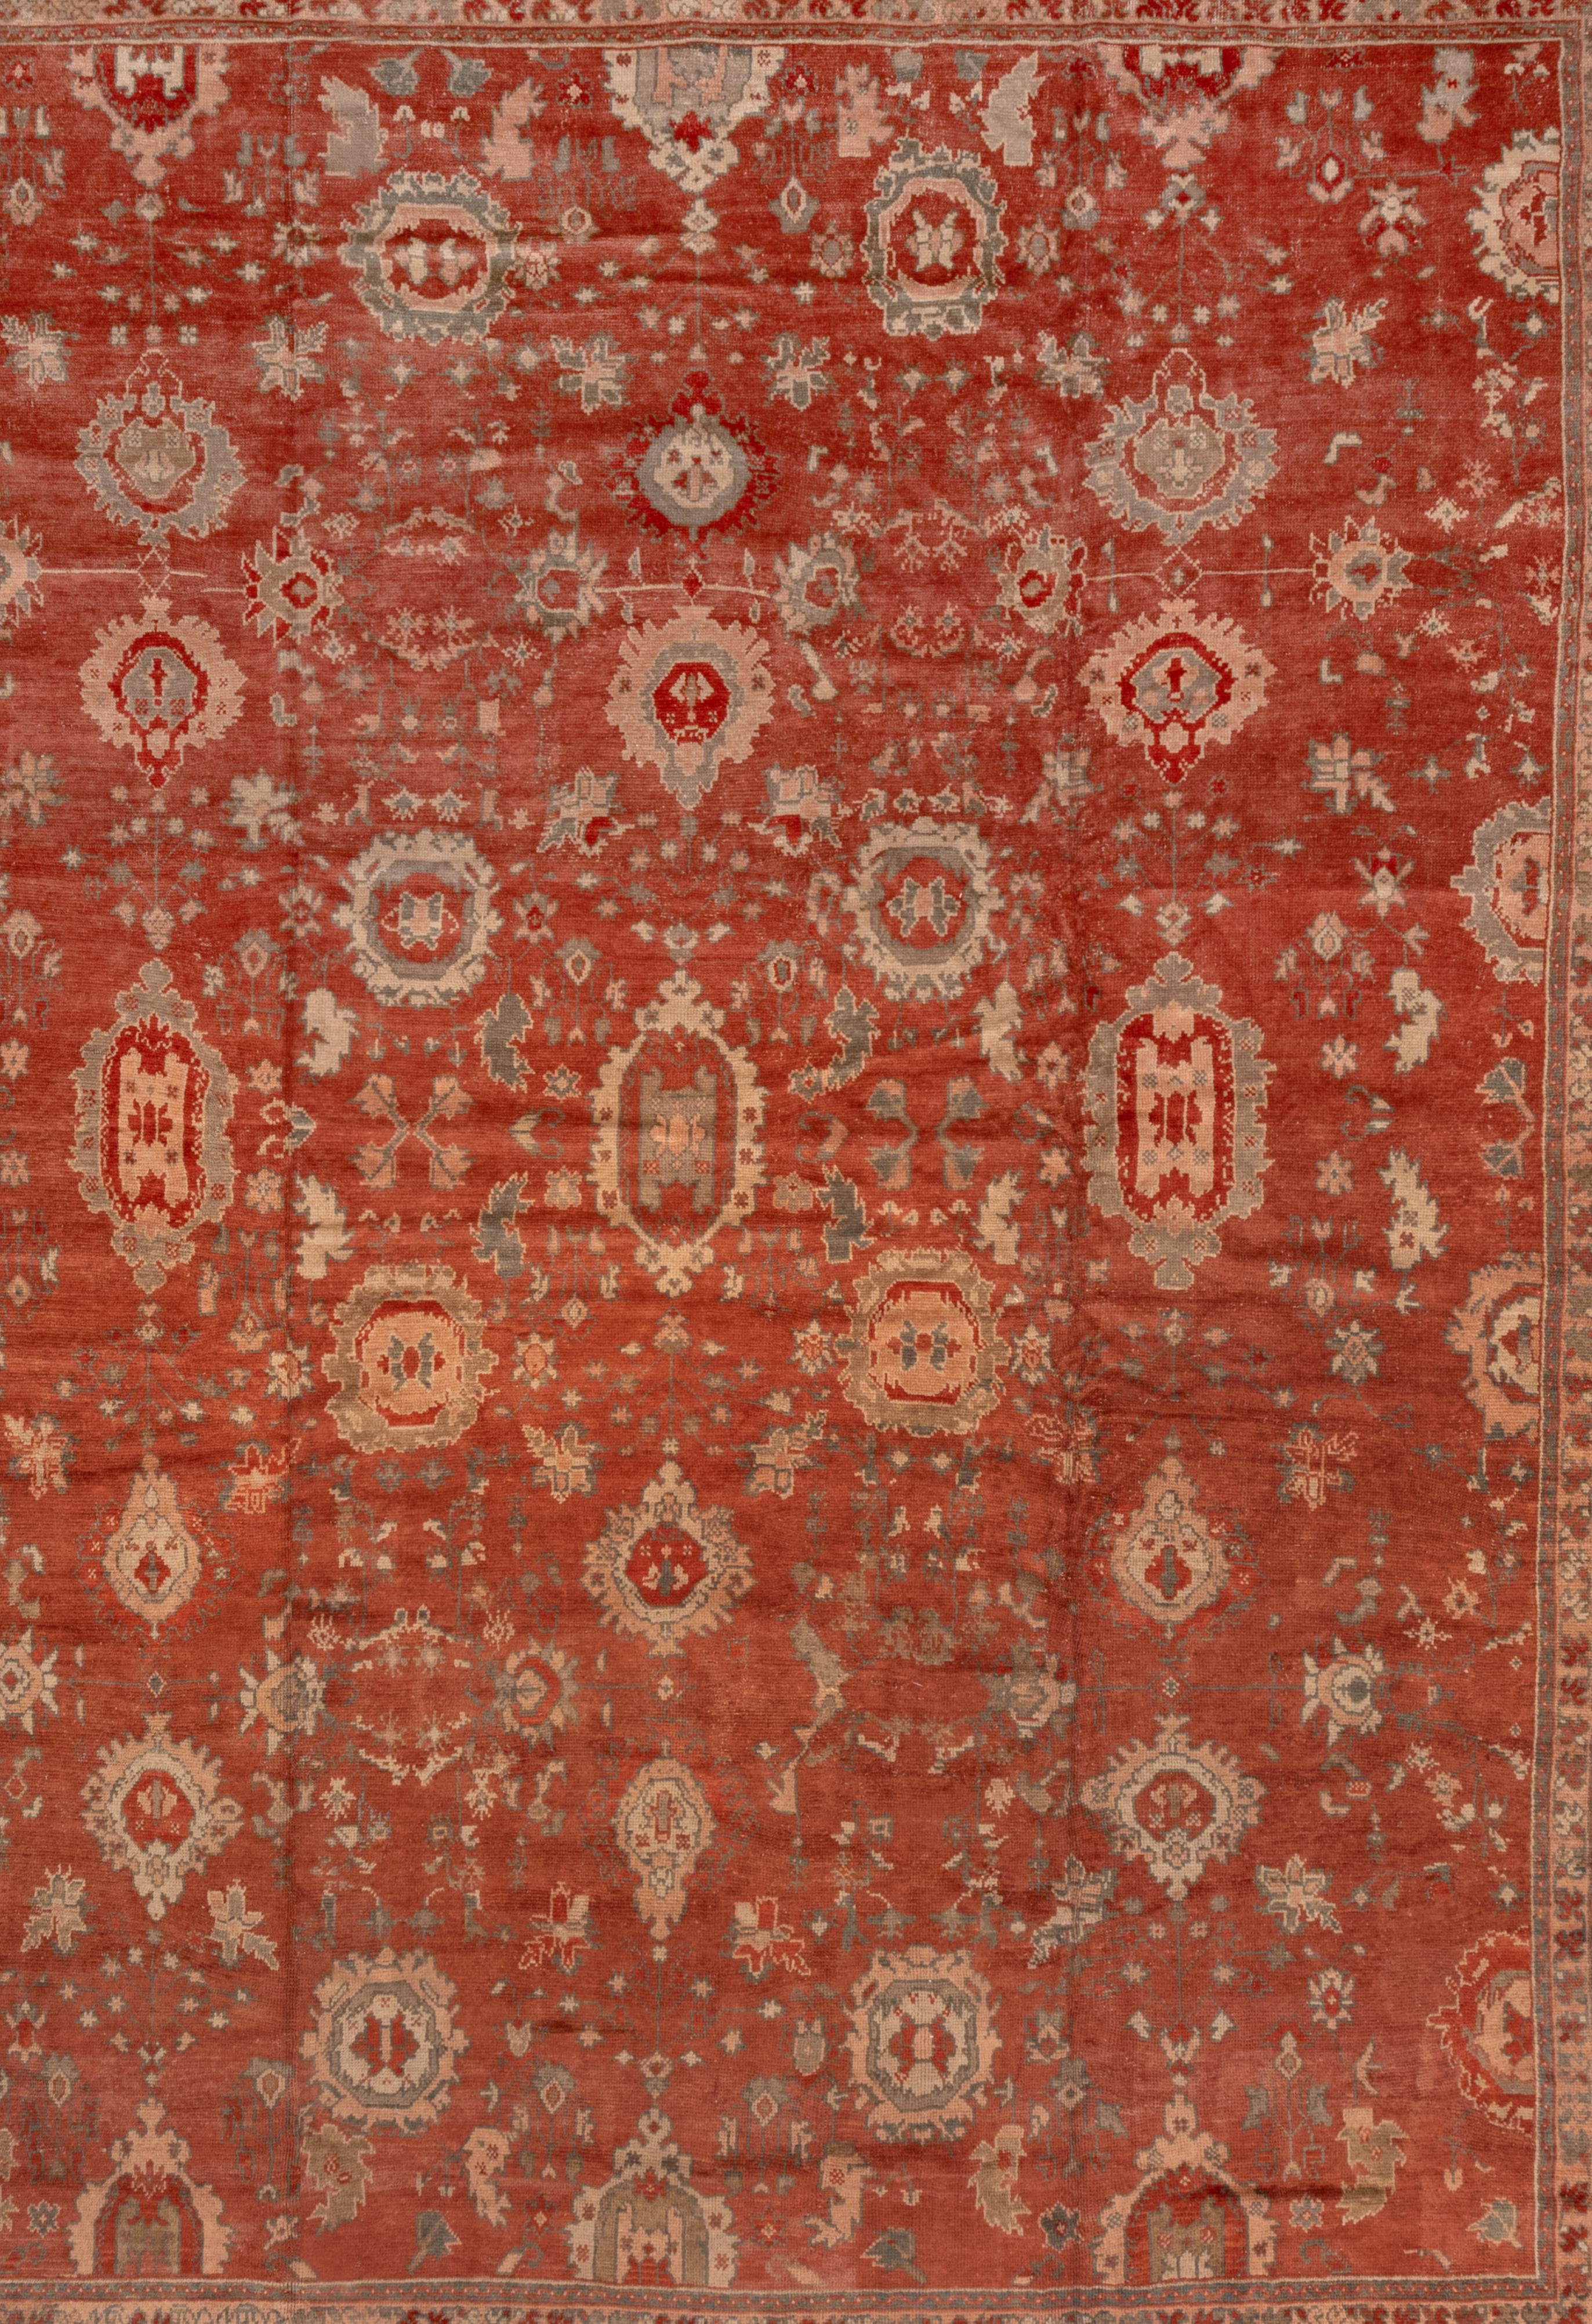 1900s Rare Antique Turkish Oushak Carpet, Rusty Red Allover Field, Green Borders For Sale 1